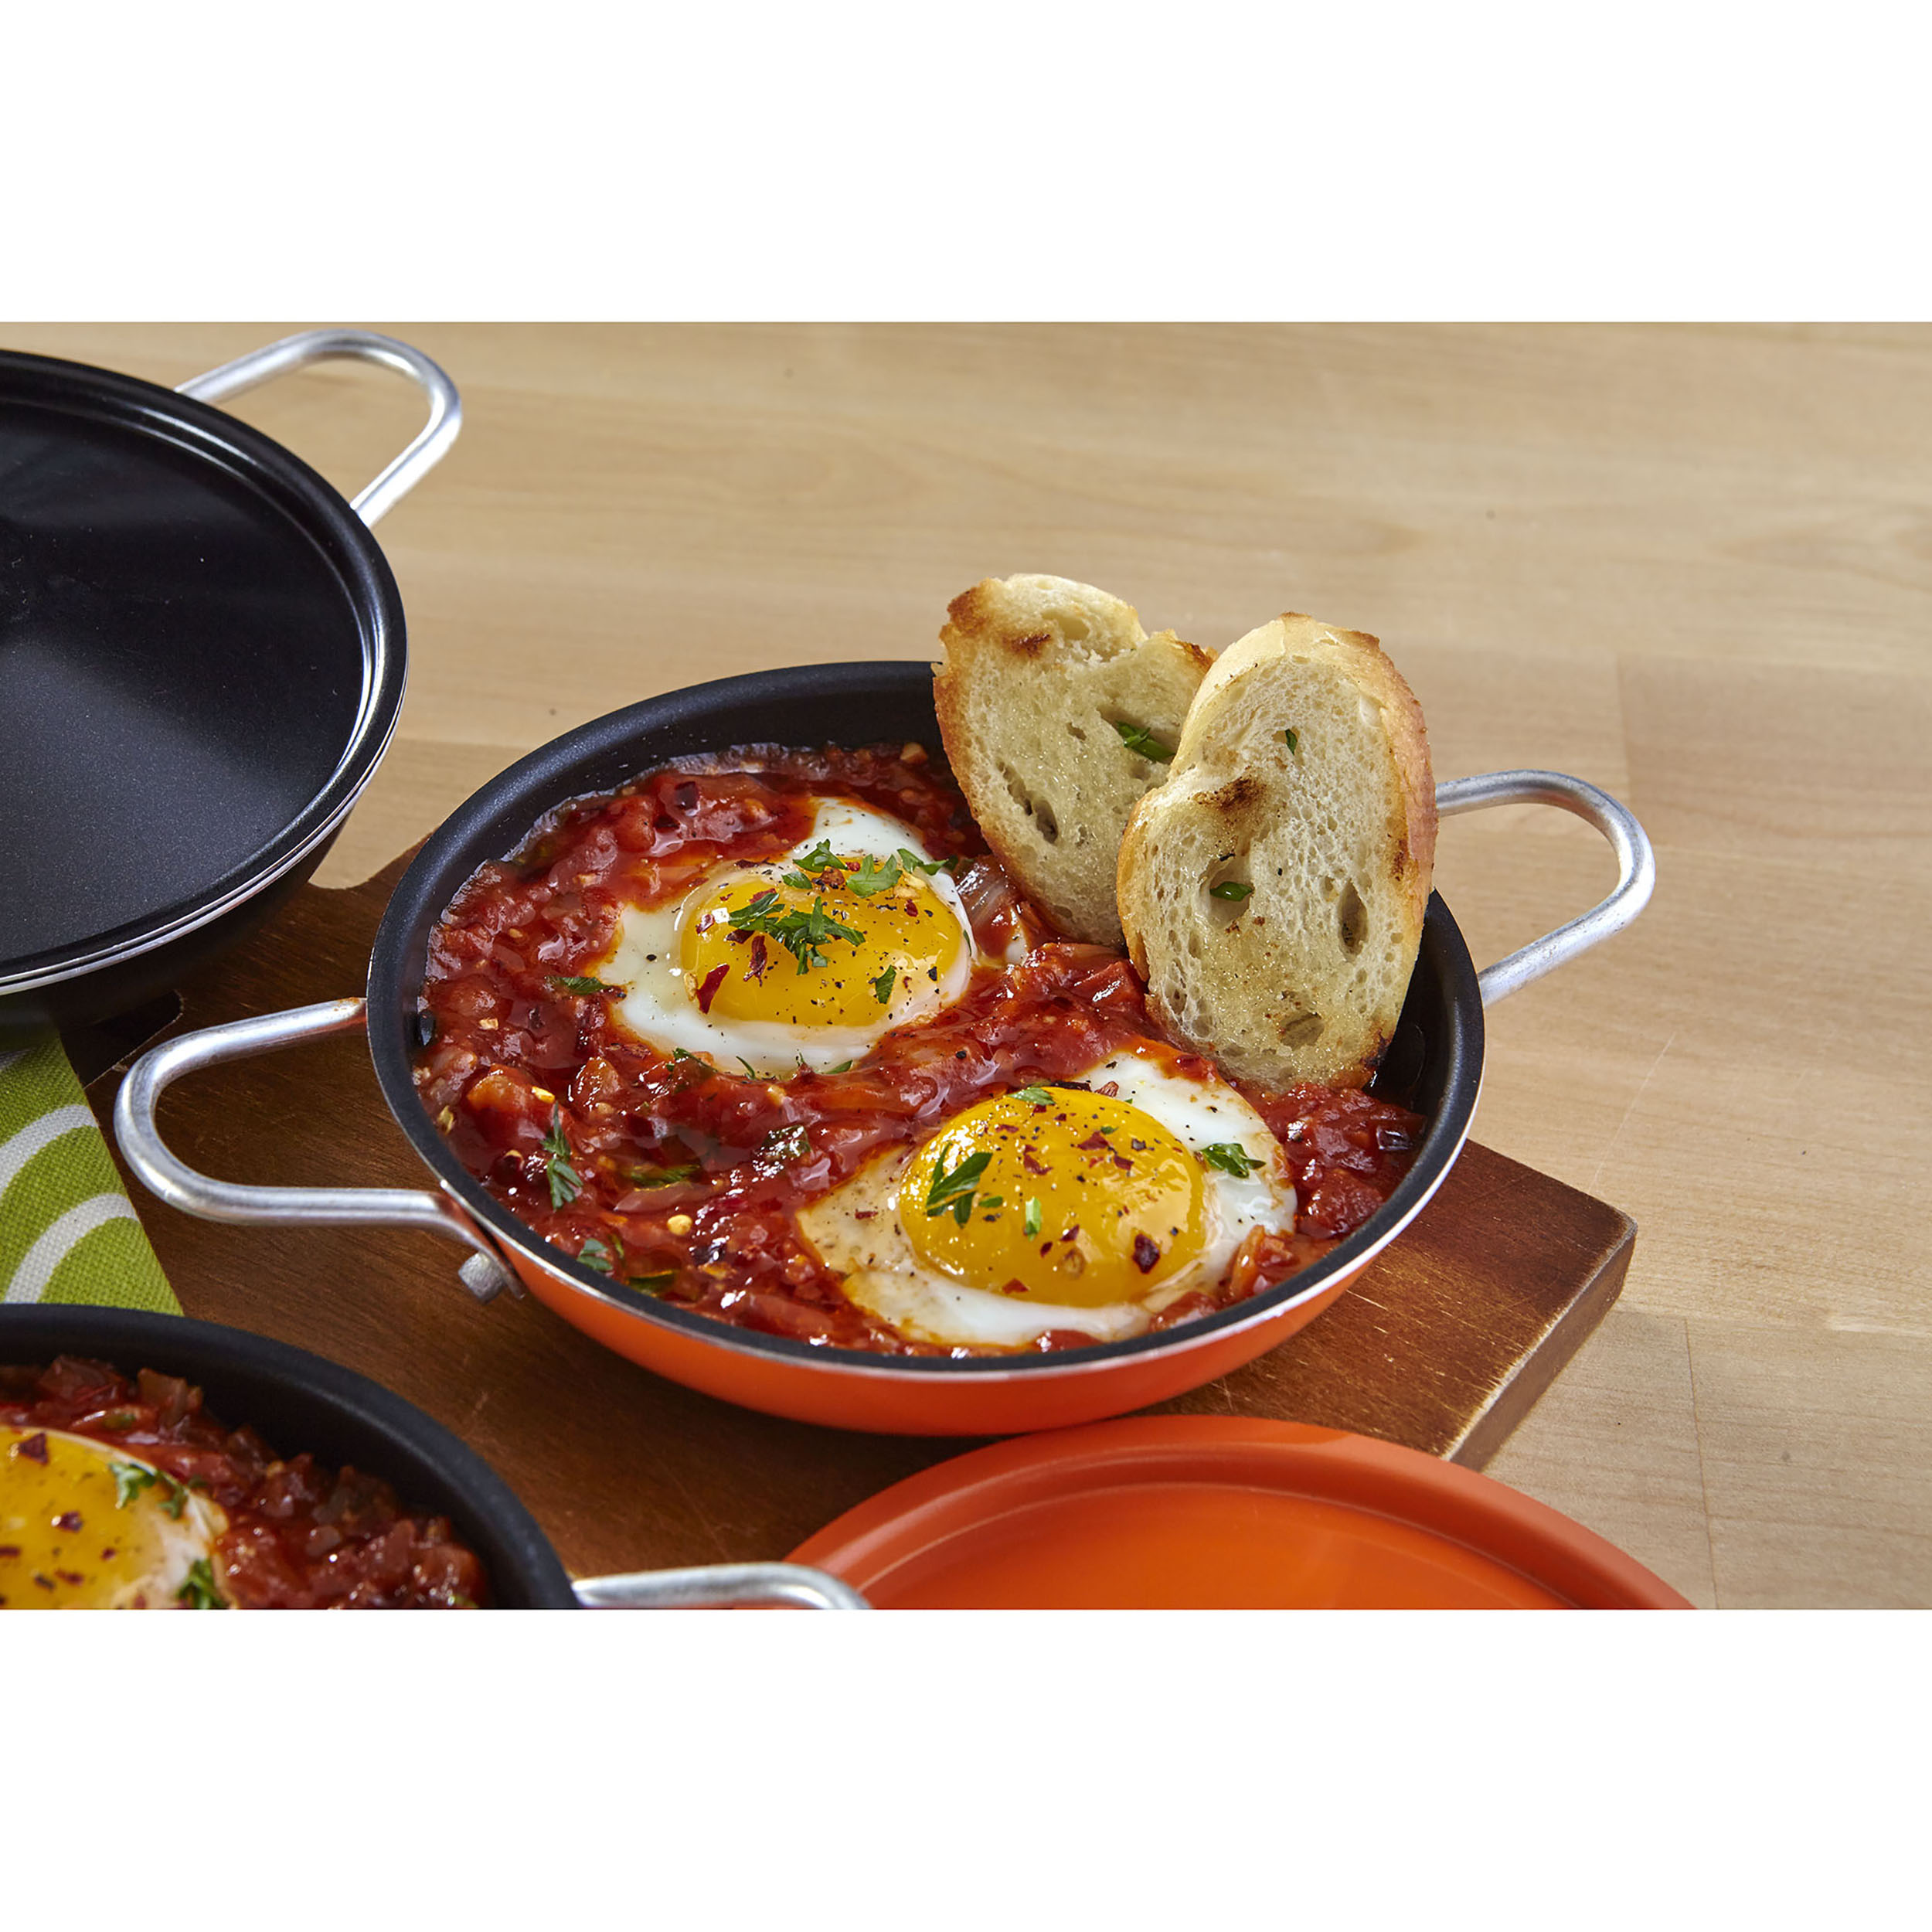 IMUSA IMUSA Egg Pan with PTFE Nonstick Surface Lid and Side Handles,  Red/Orange/Black - IMUSA